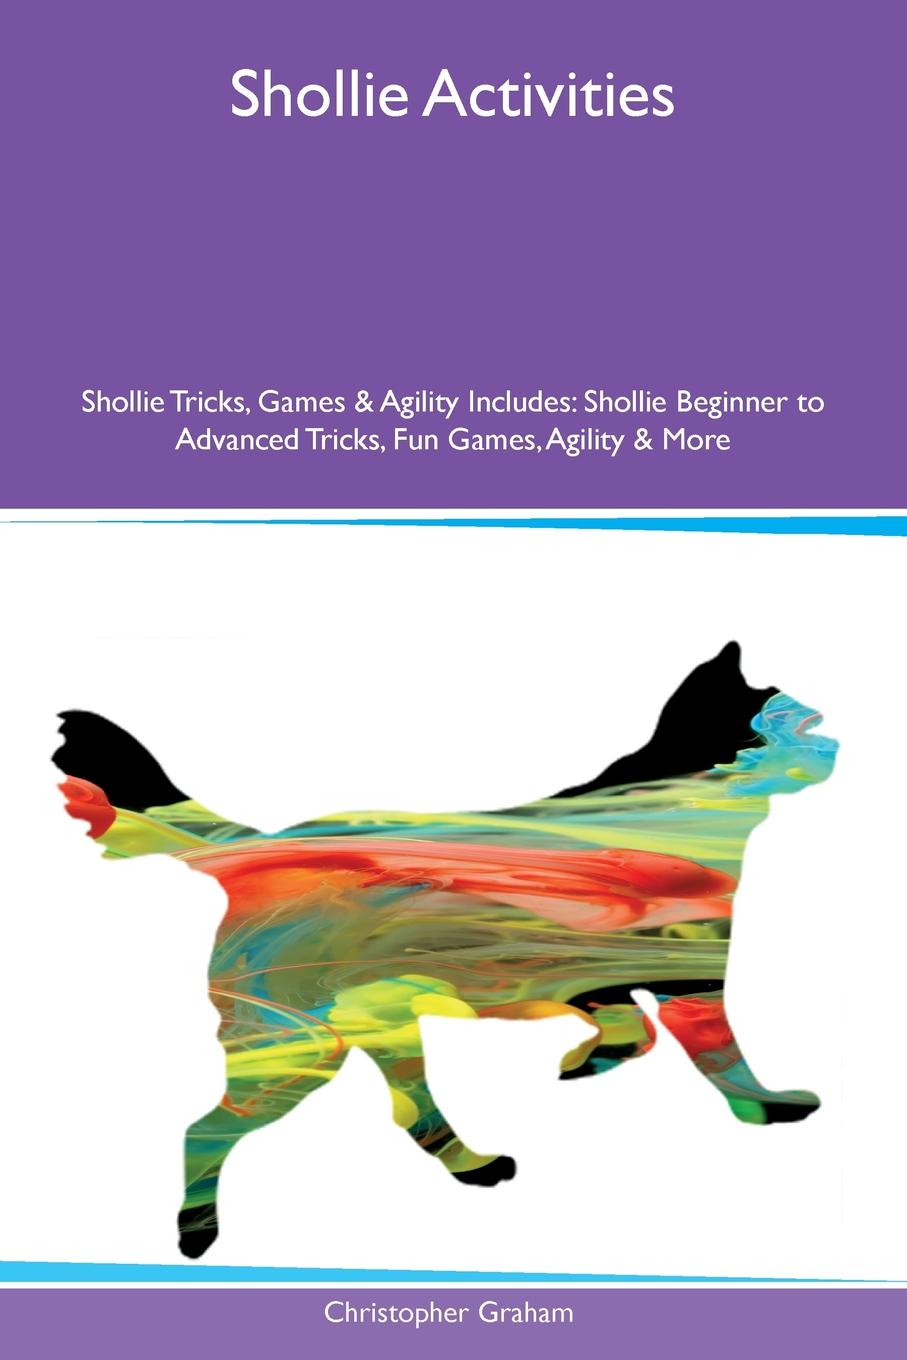 Shollie Activities Shollie Tricks, Games & Agility Includes. Shollie Beginner to Advanced Tricks, Fun Games, Agility & More